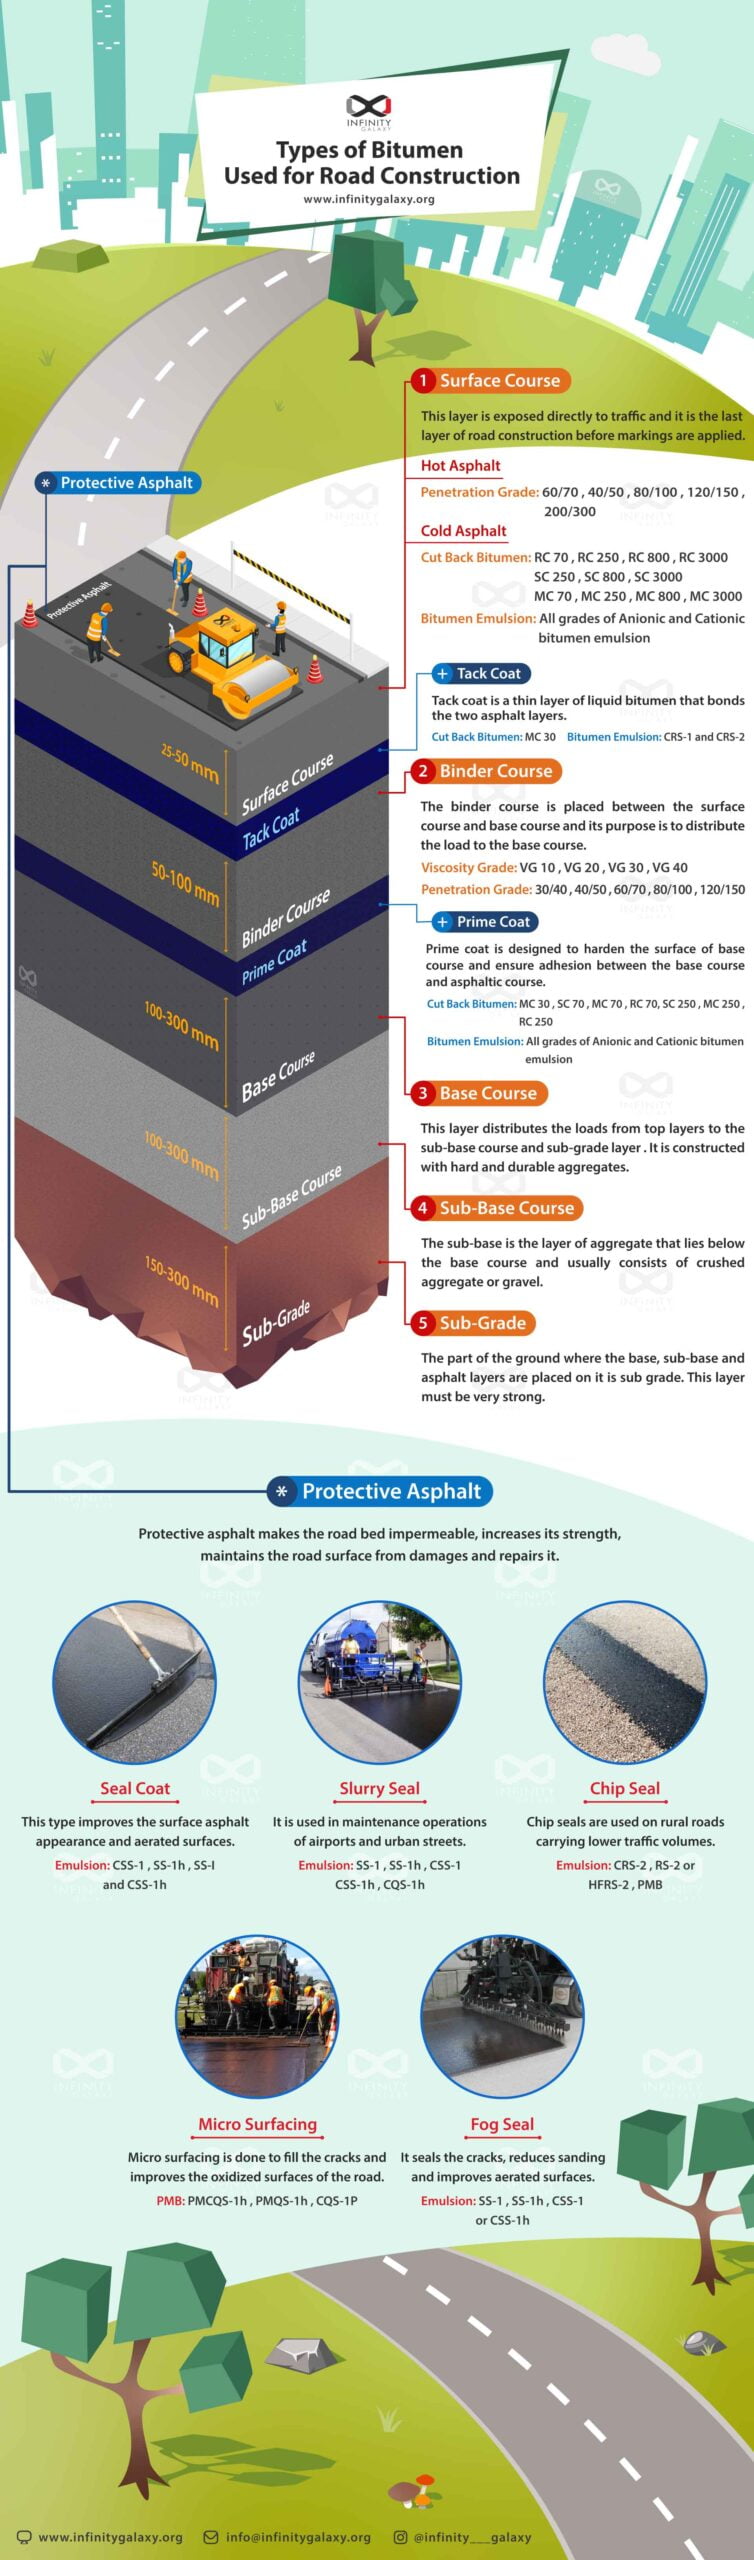 Infographic about Flexible Pavement